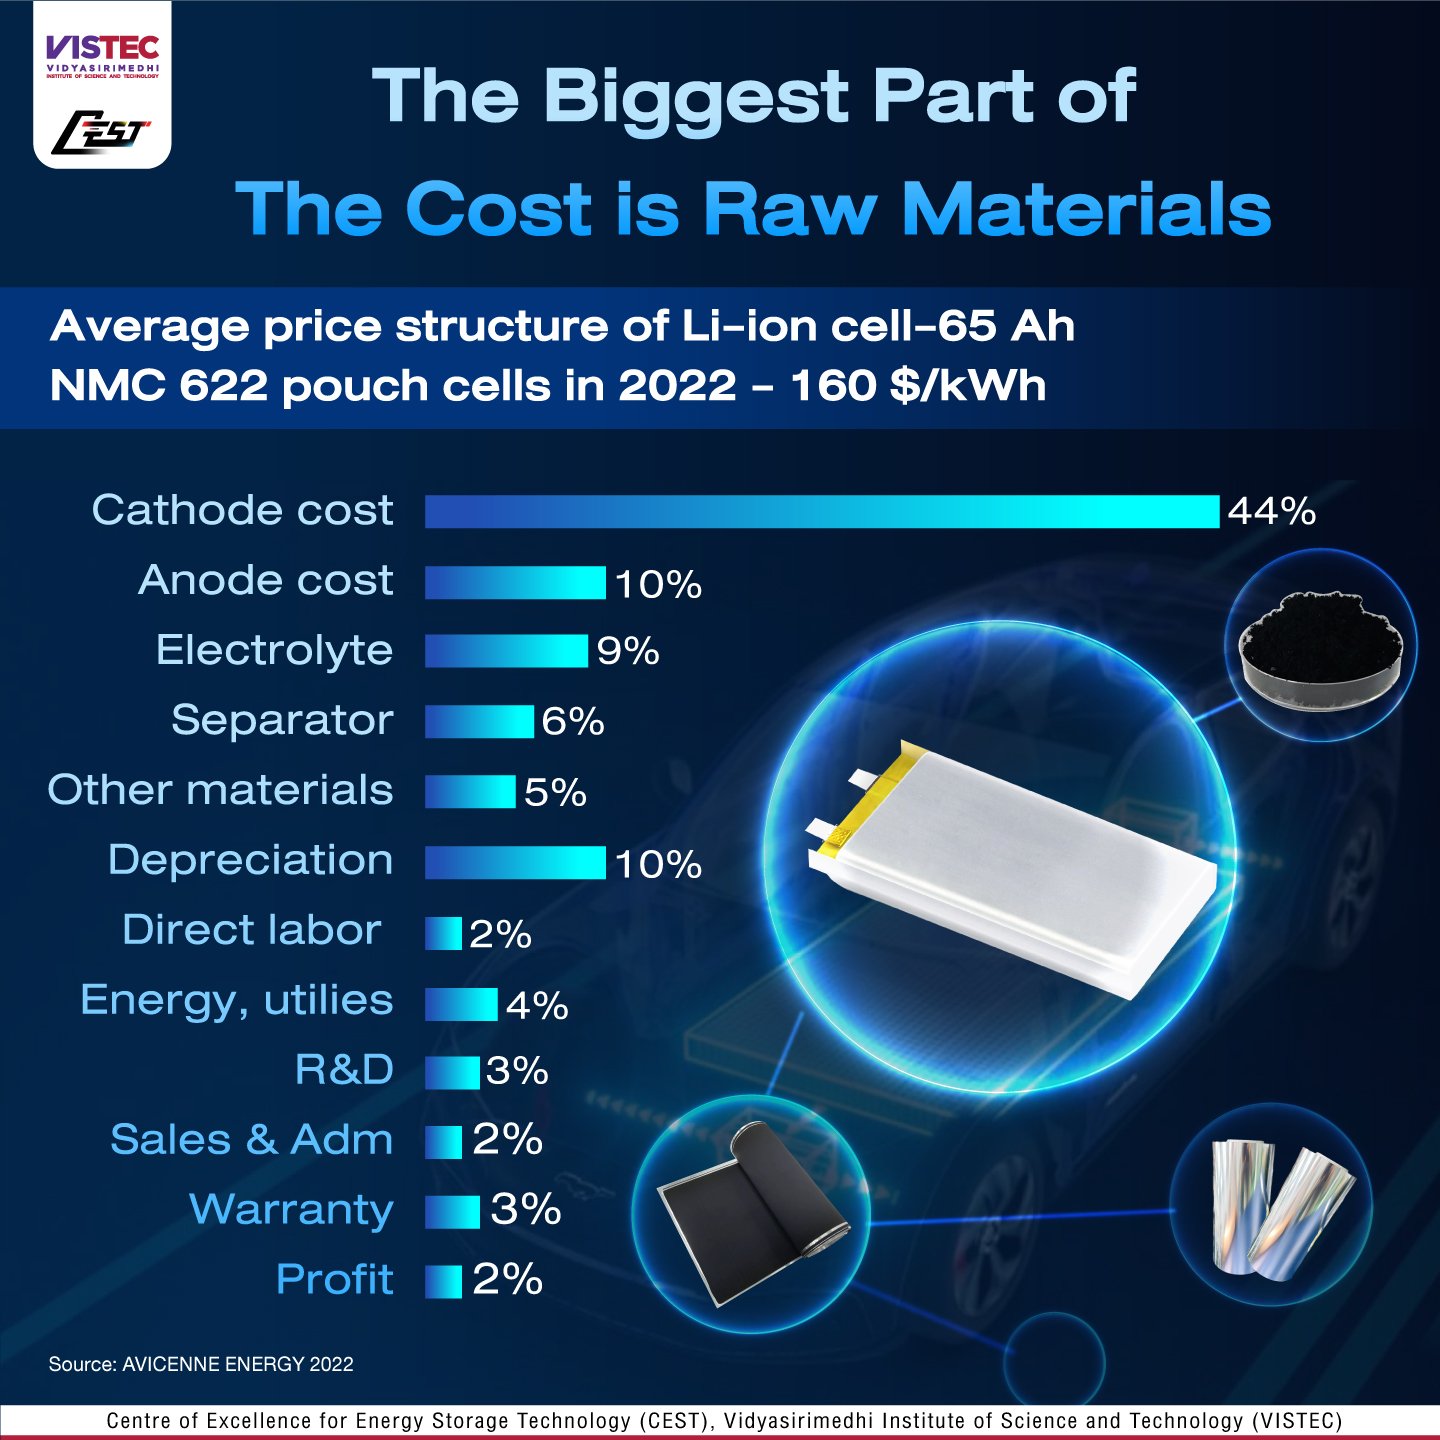 The Biggest Part of The Cost is Raw Materials